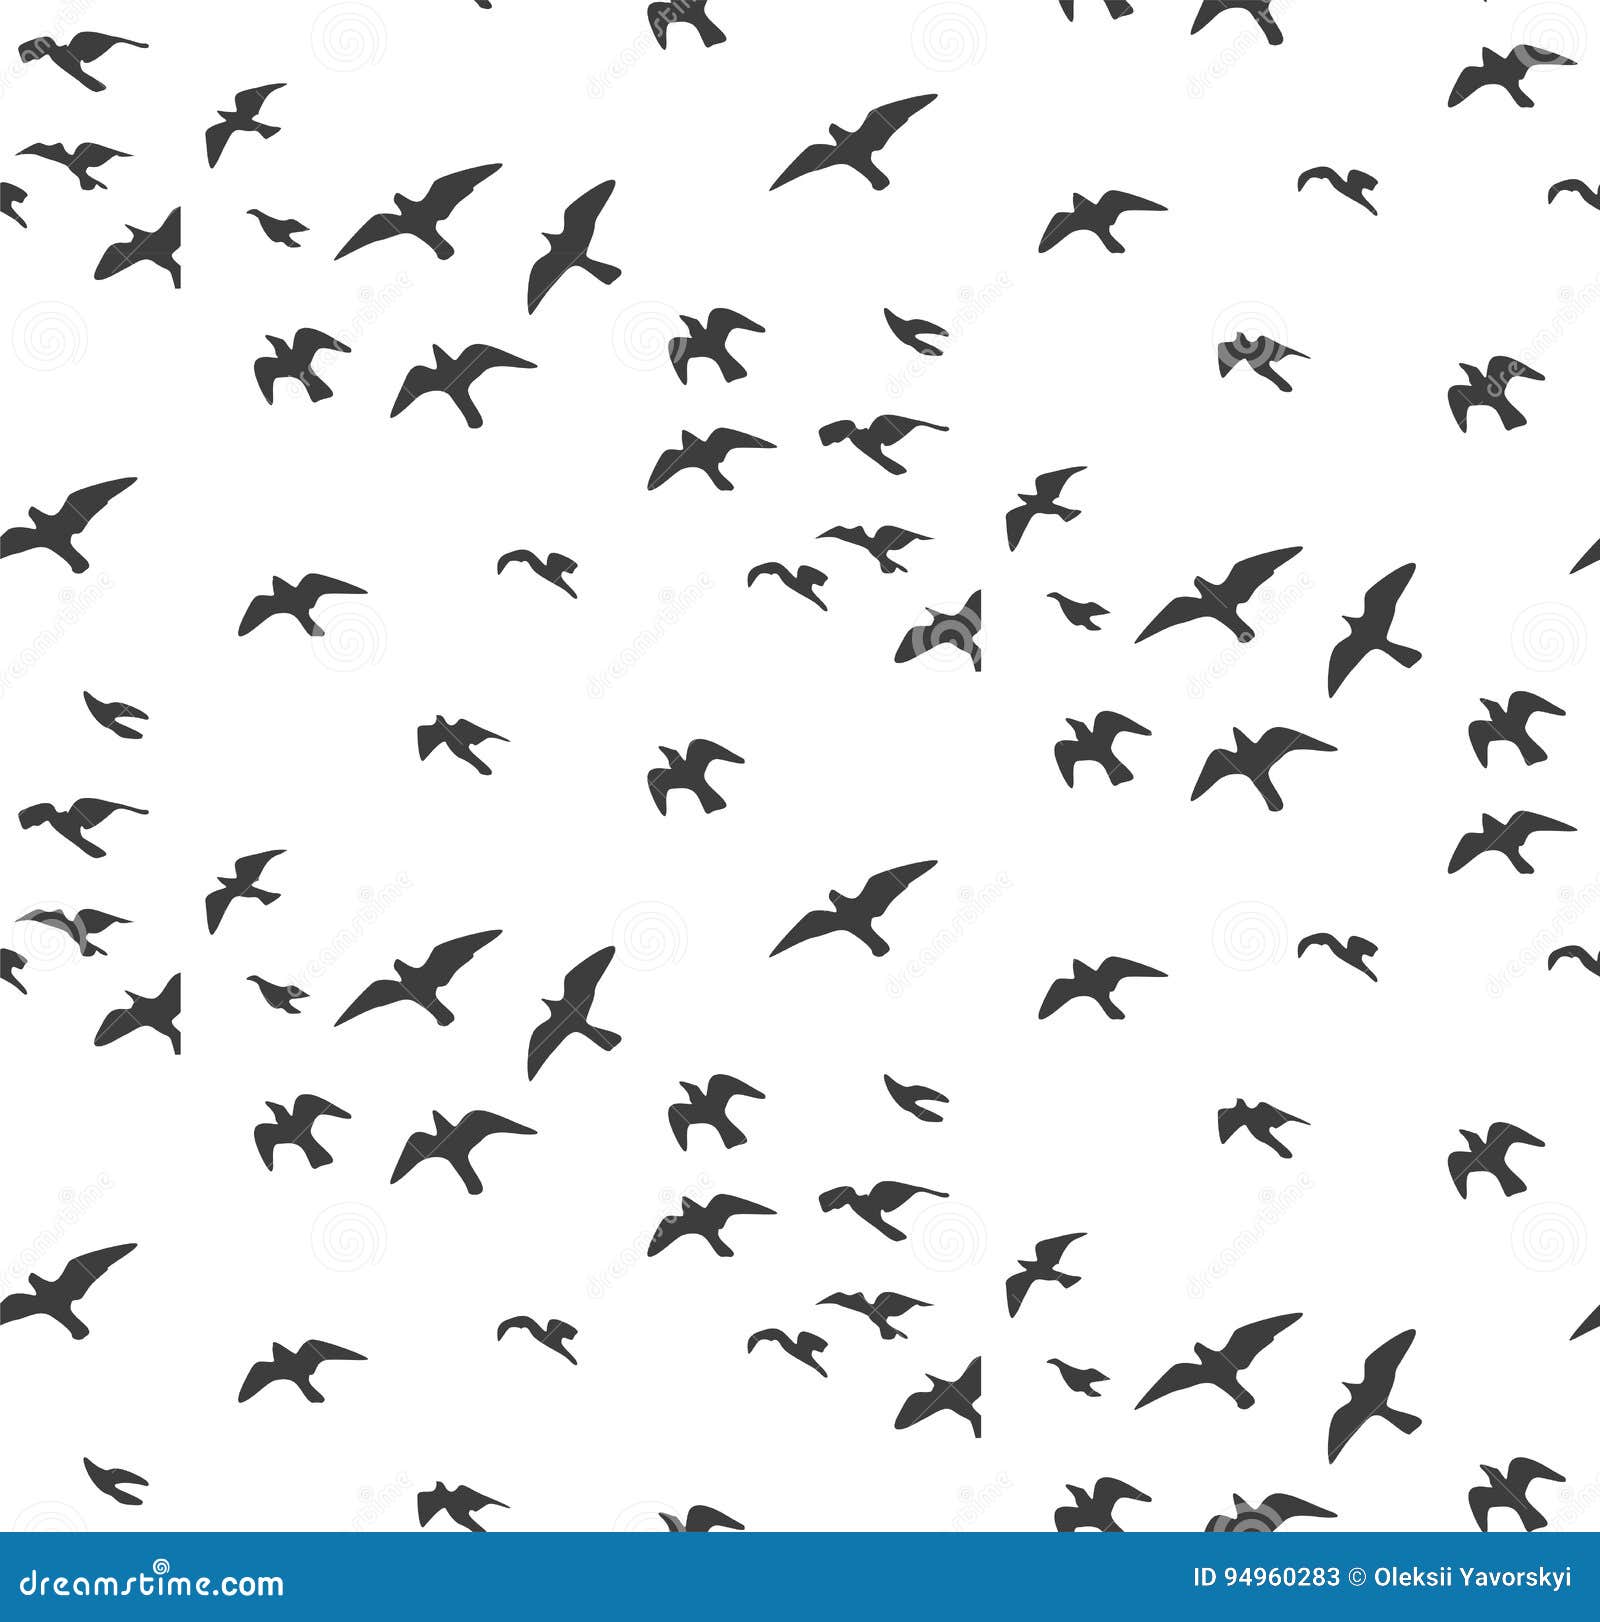 seagulls silhouettes seamless pattern. flock of flying birds gray silhouette. dove, sea-gull sketch abstract bird  for wrap